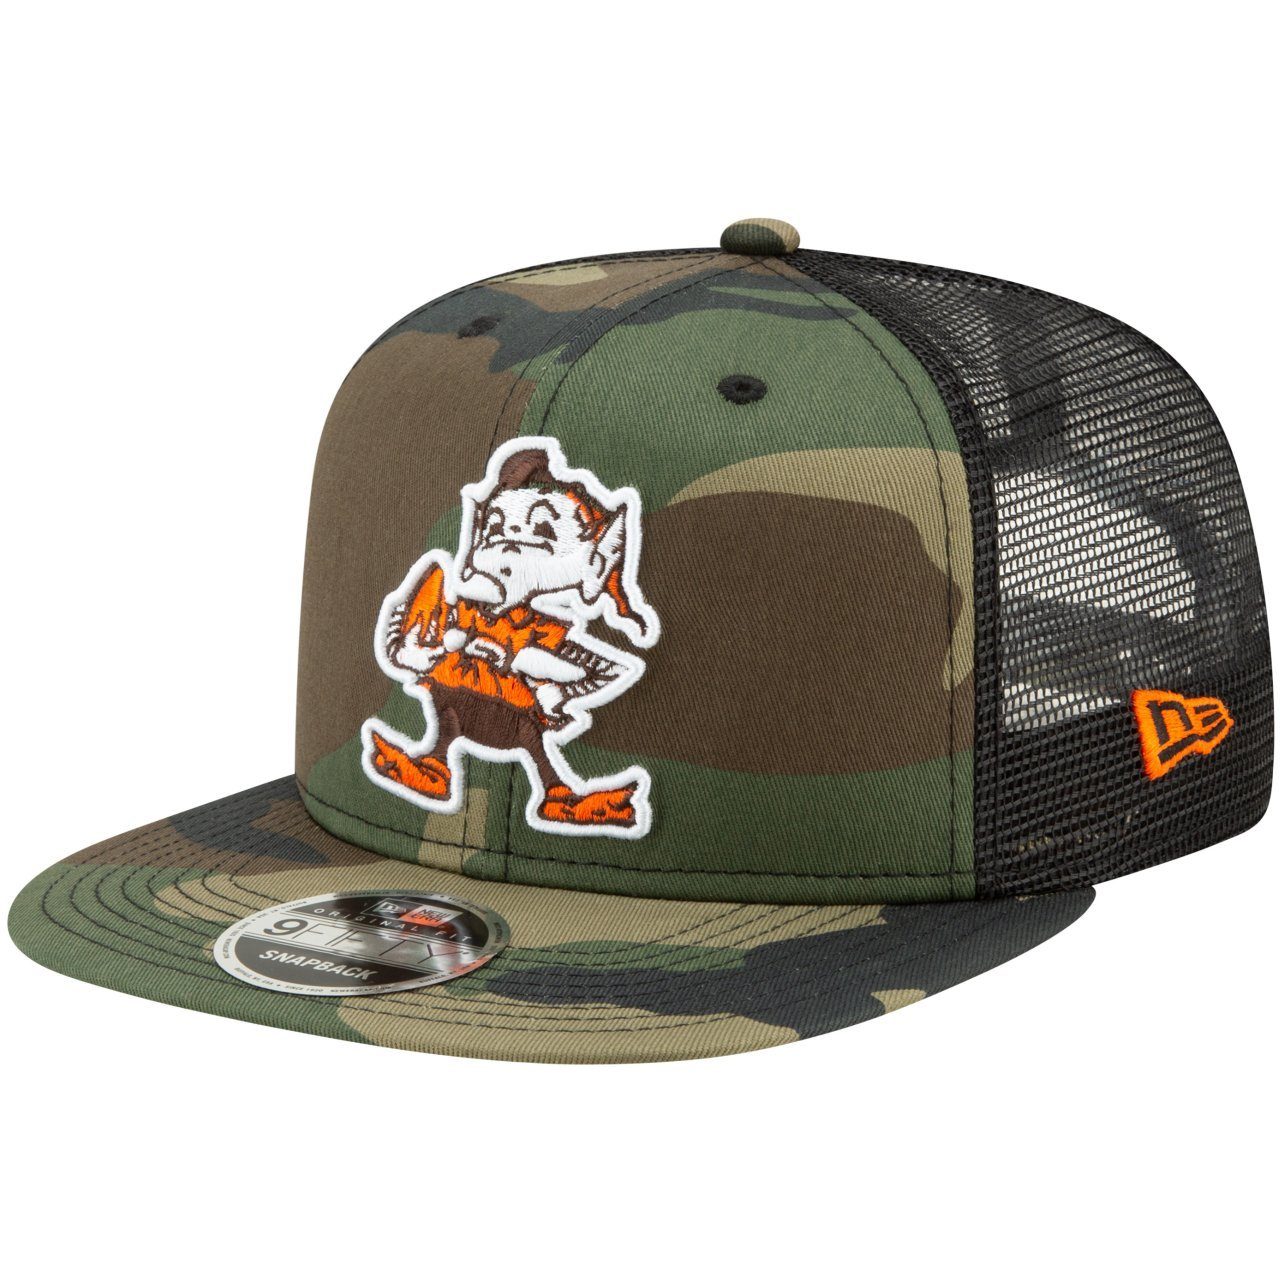 Cap Snapback Cleveland Throwback 9Fifty Browns New Era